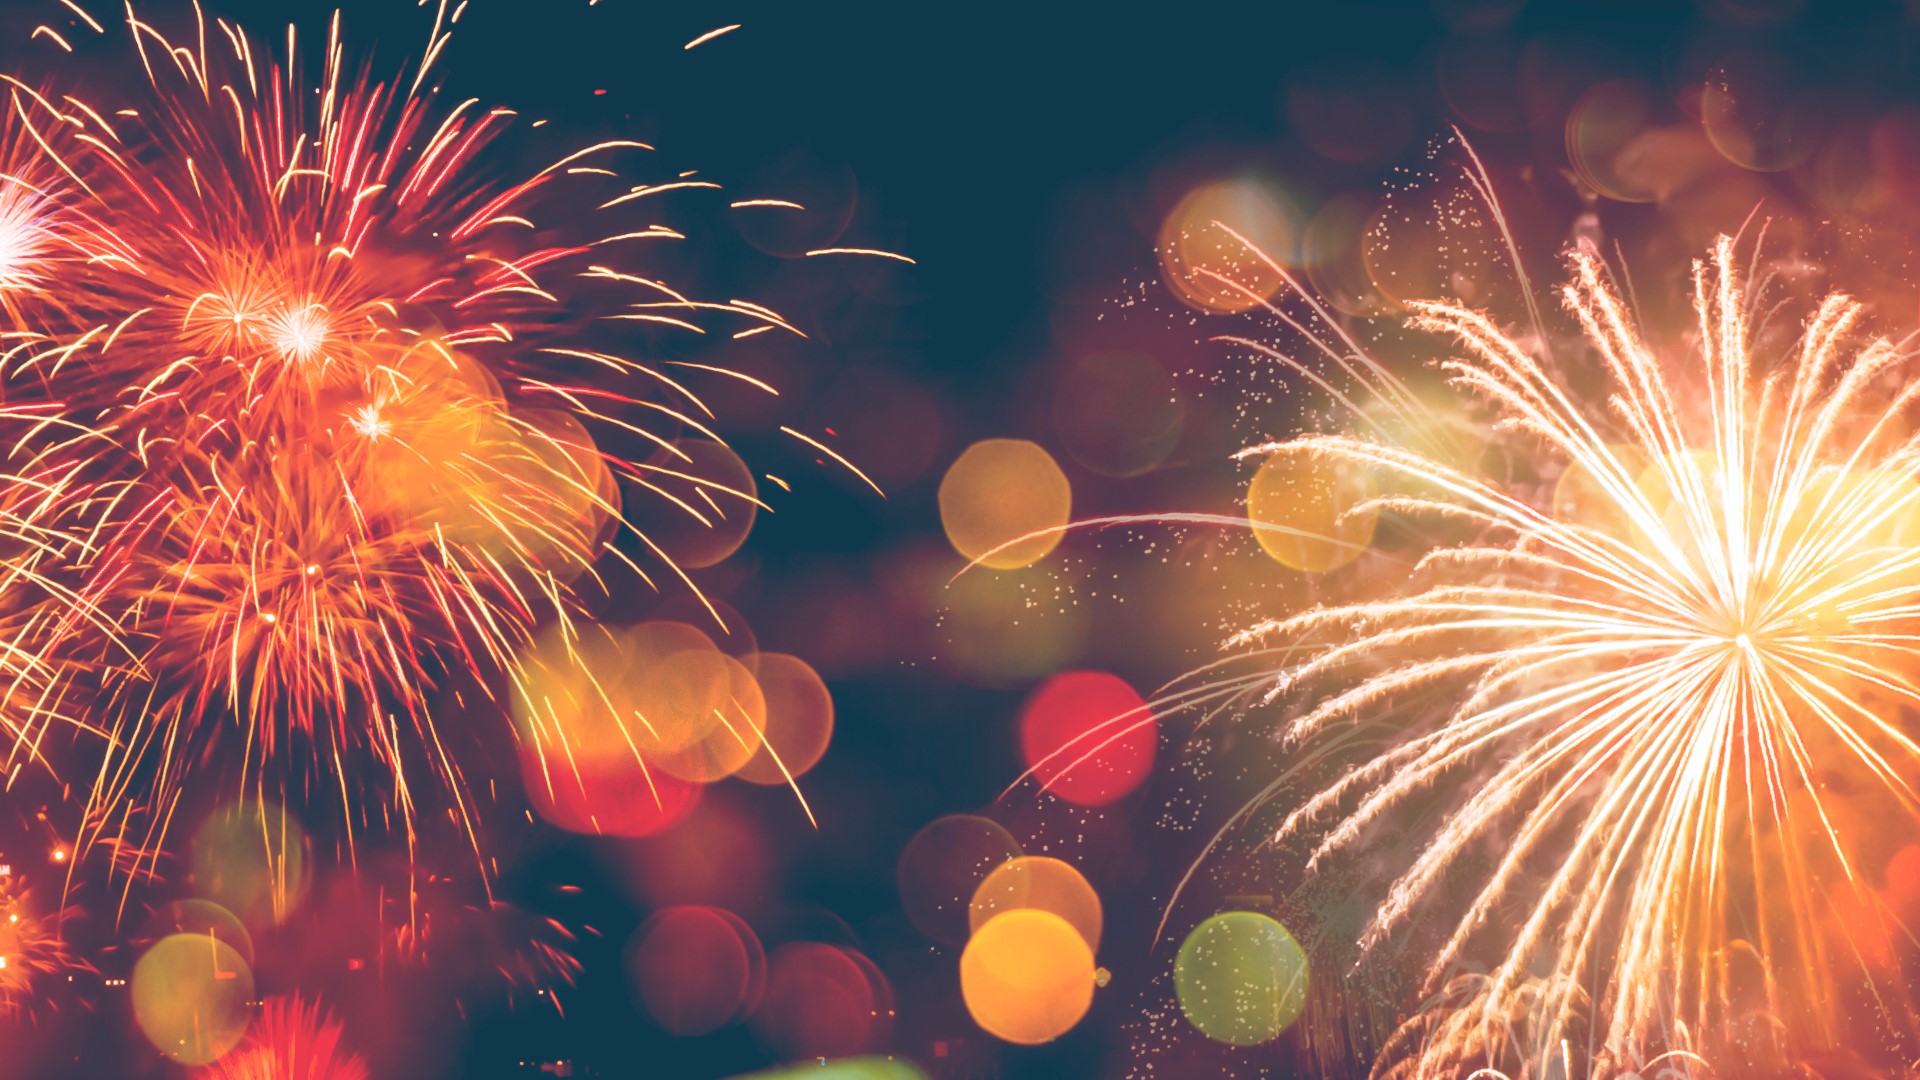 June 28 is the first day you can start blowing up "safe and sane" fireworks through the Fourth of July. But what does "safe and sane" mean? Here is what you need to know about how to set off fireworks legally for Independence Day.